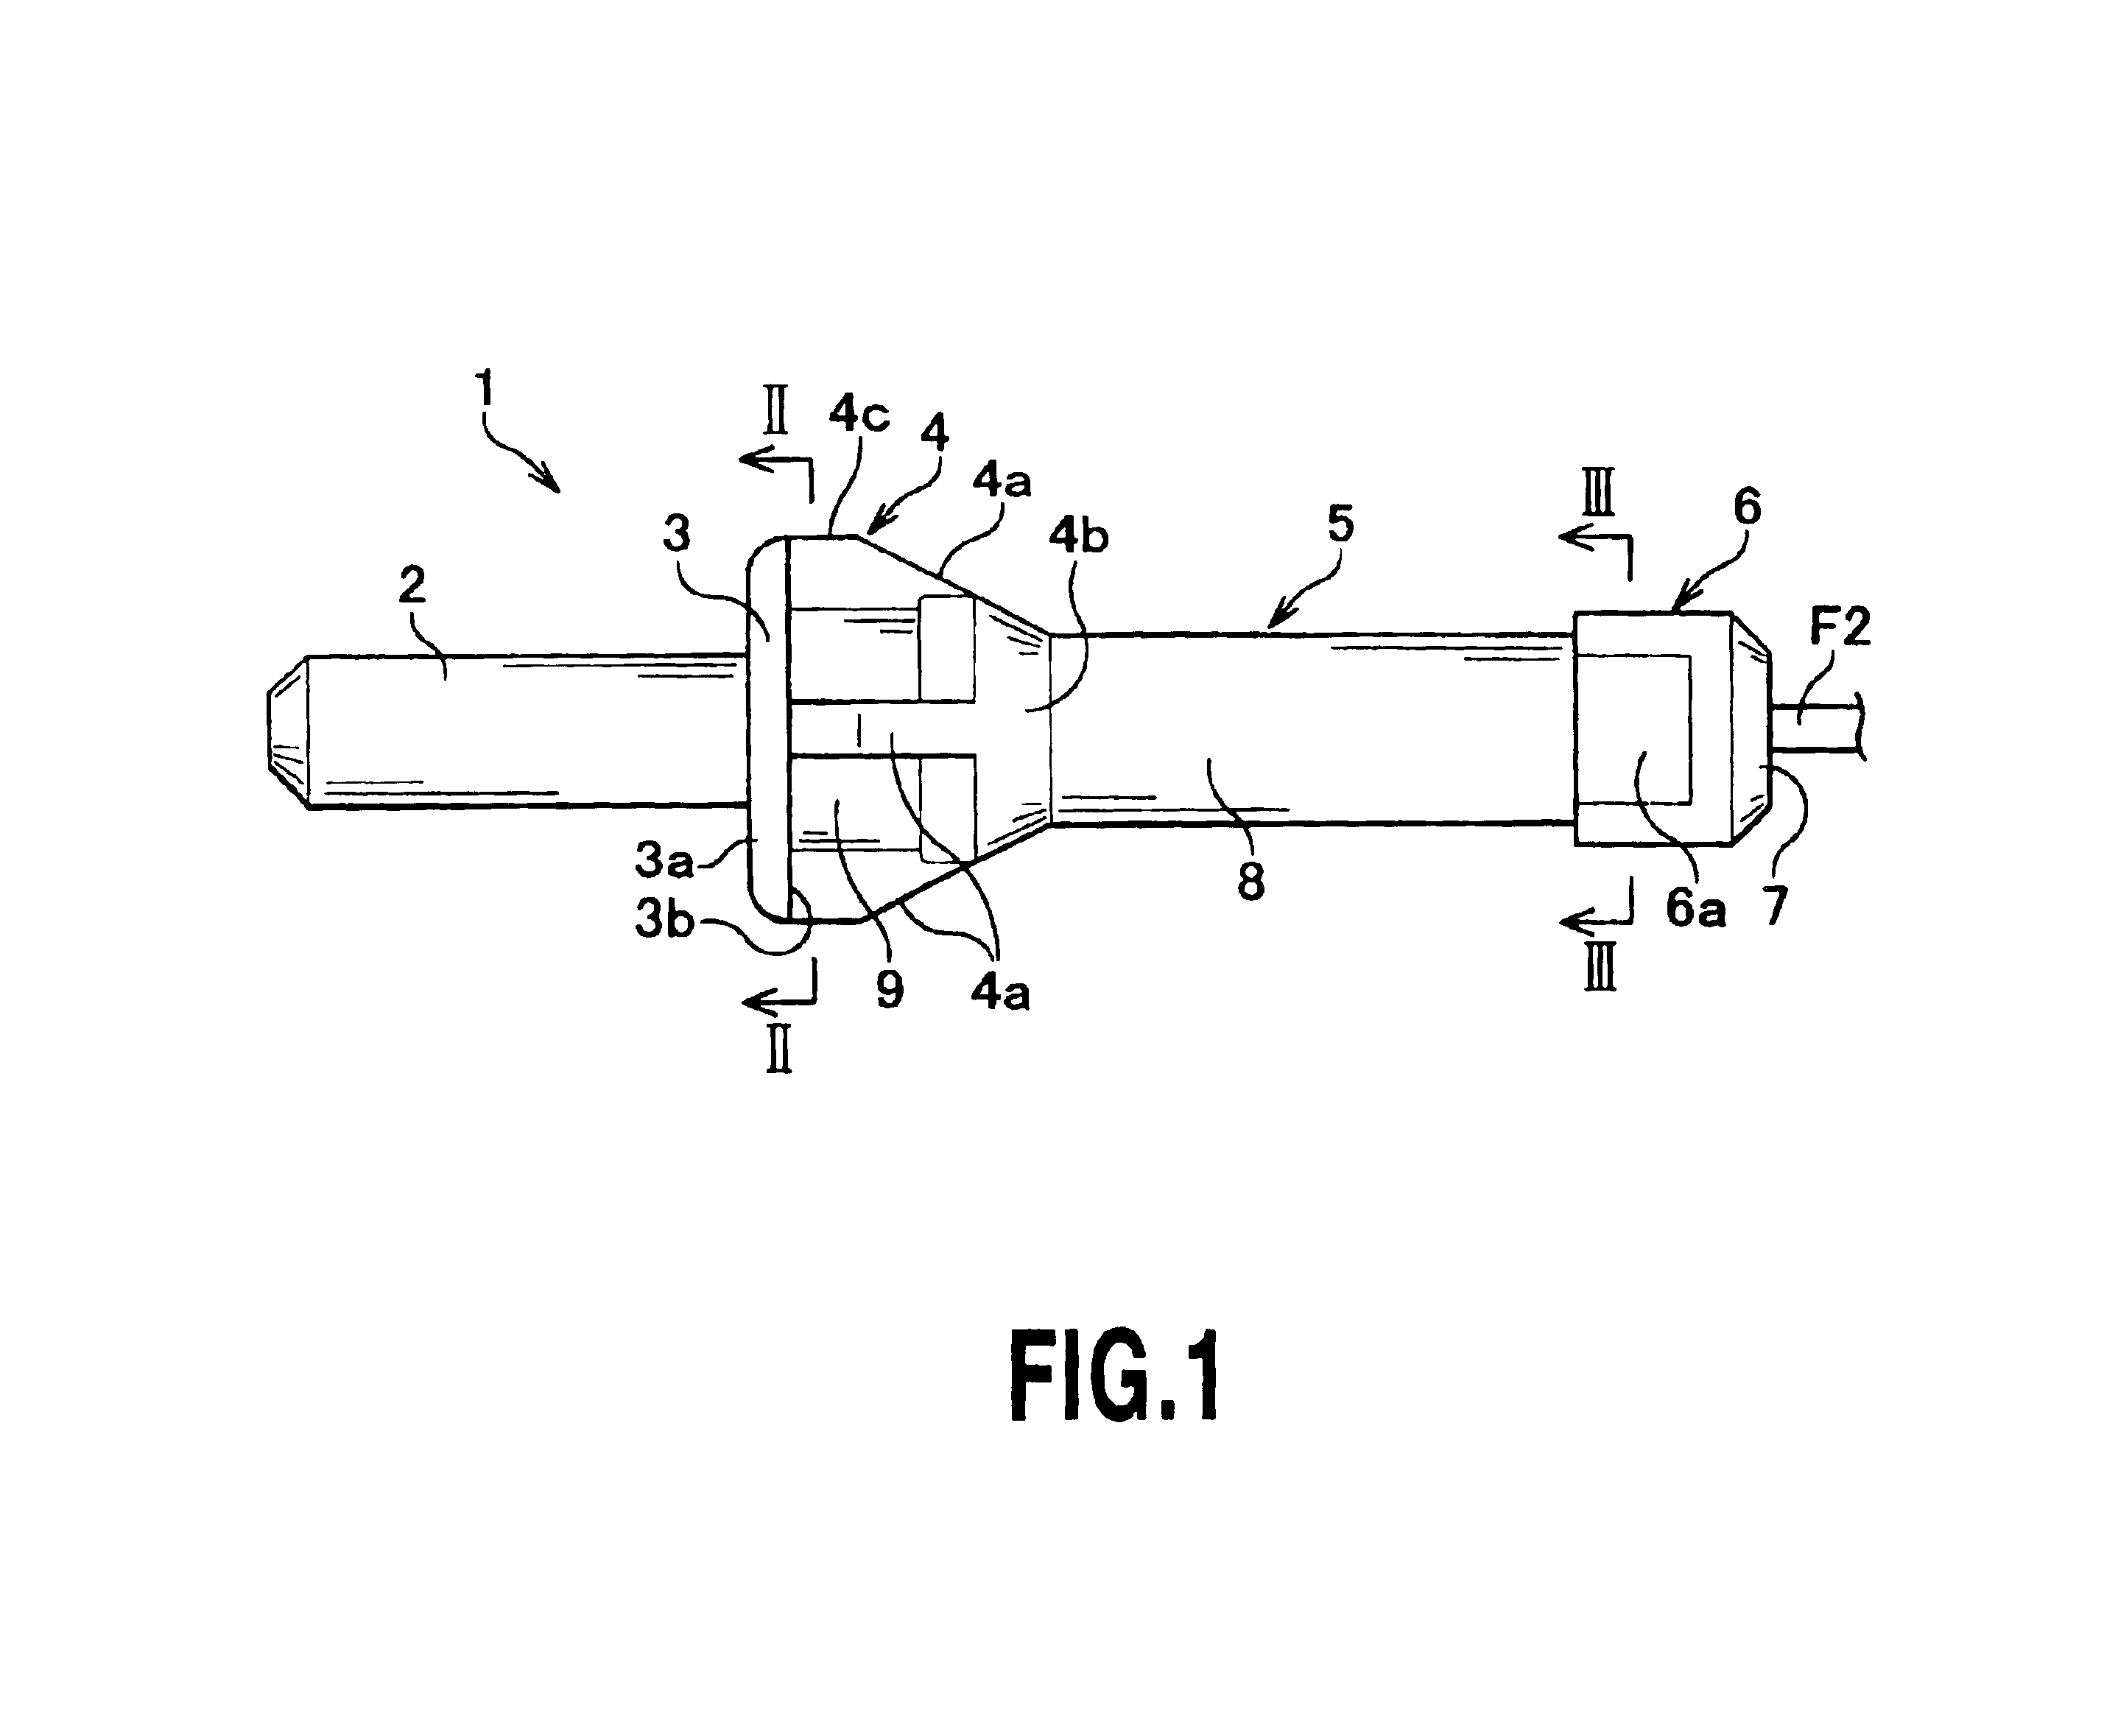 Optical fiber cross-connect with a connection block, an alignment block and a handling device